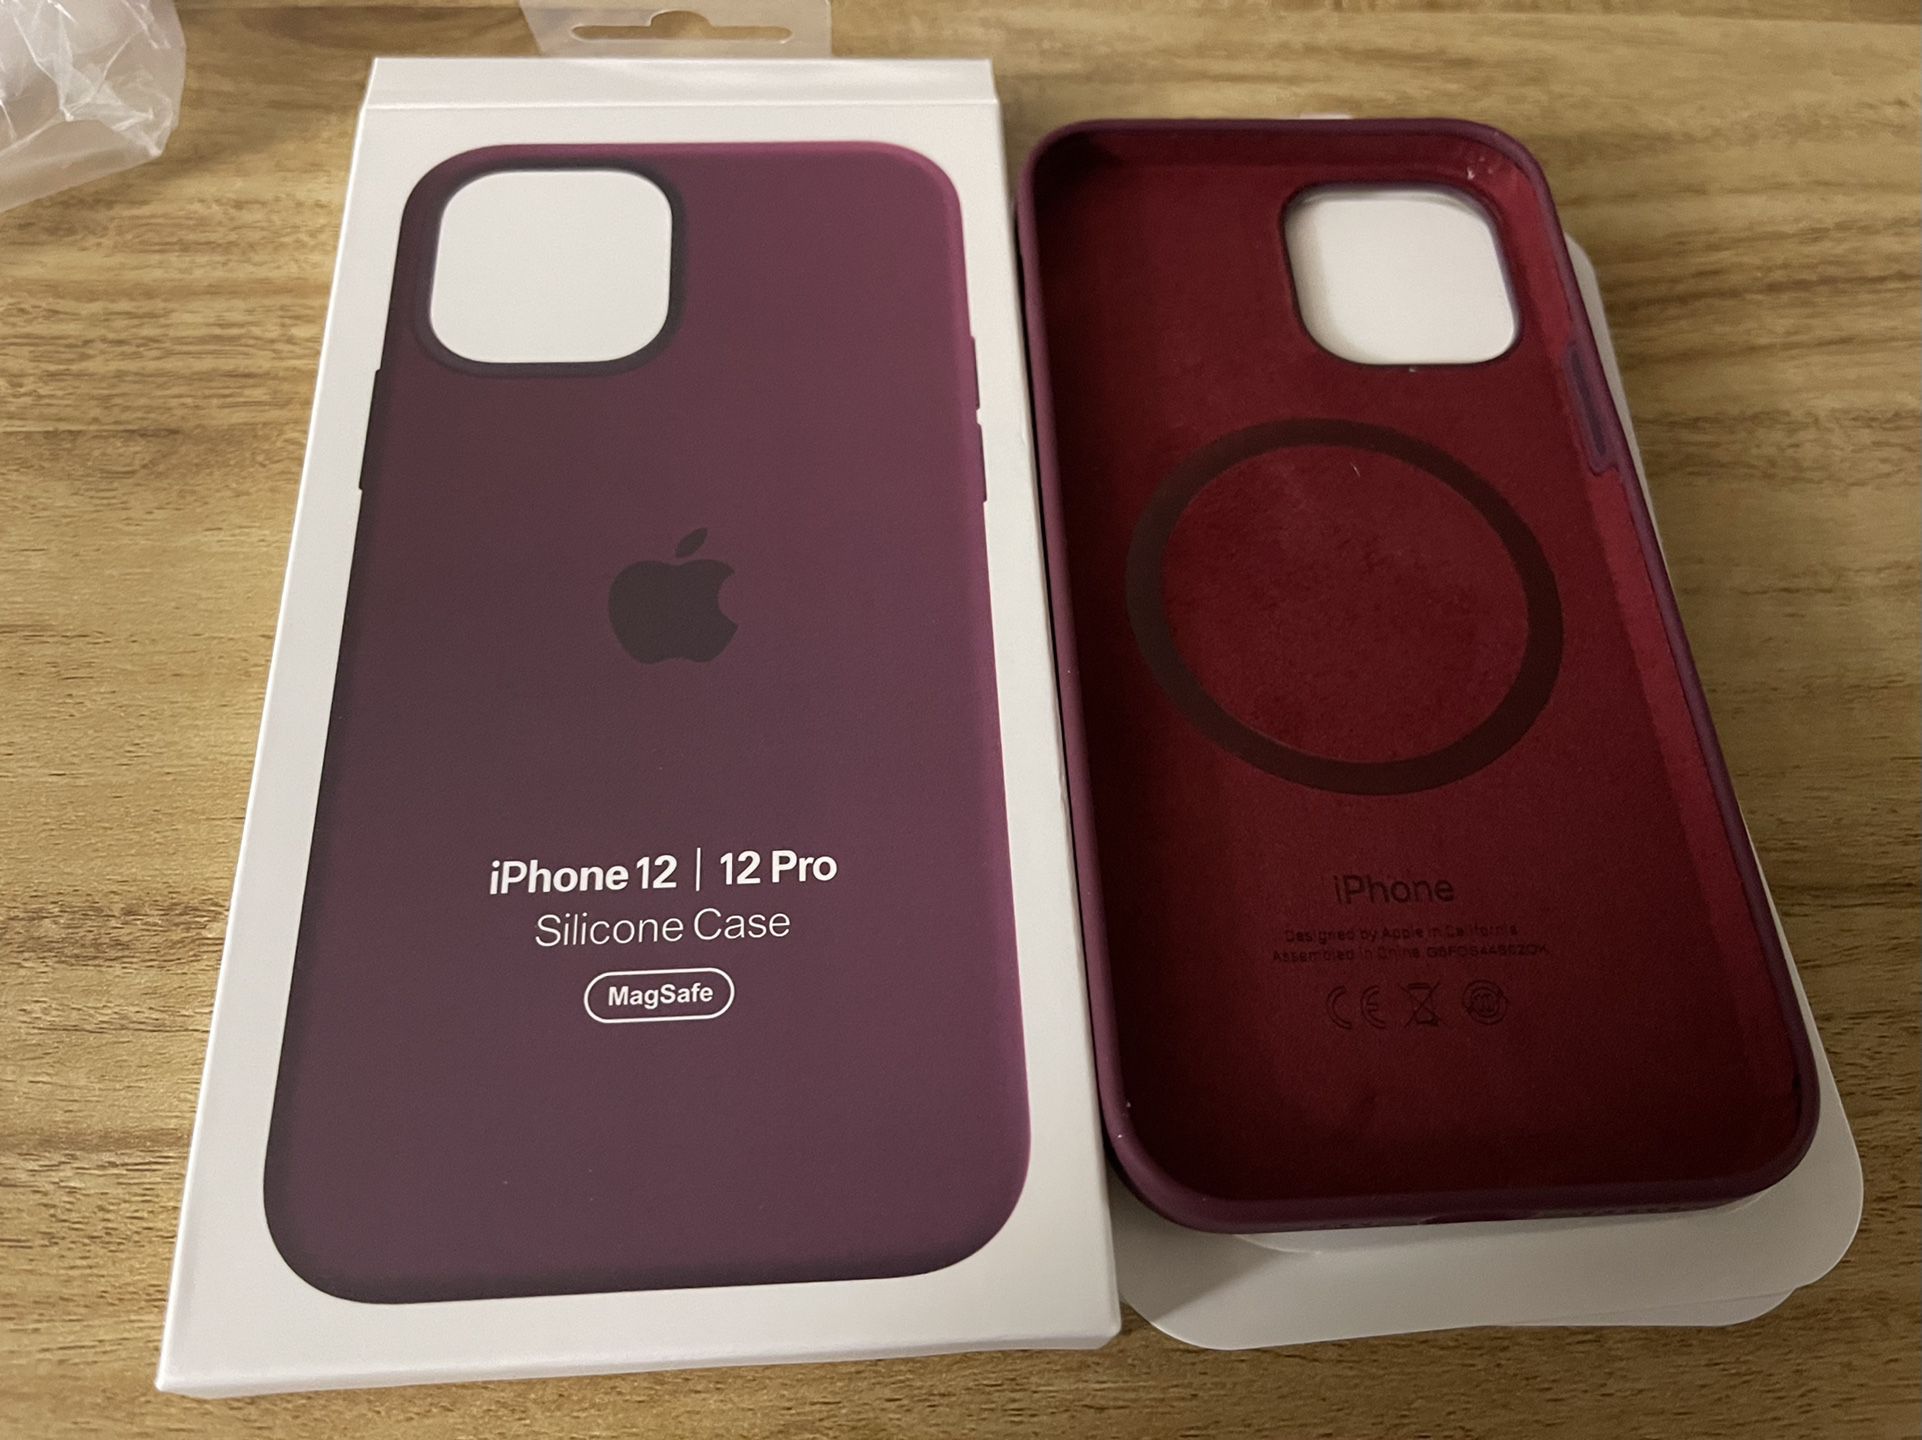 iPhone 12 | 12 Pro Silicone Case with MagSafe - Plum 